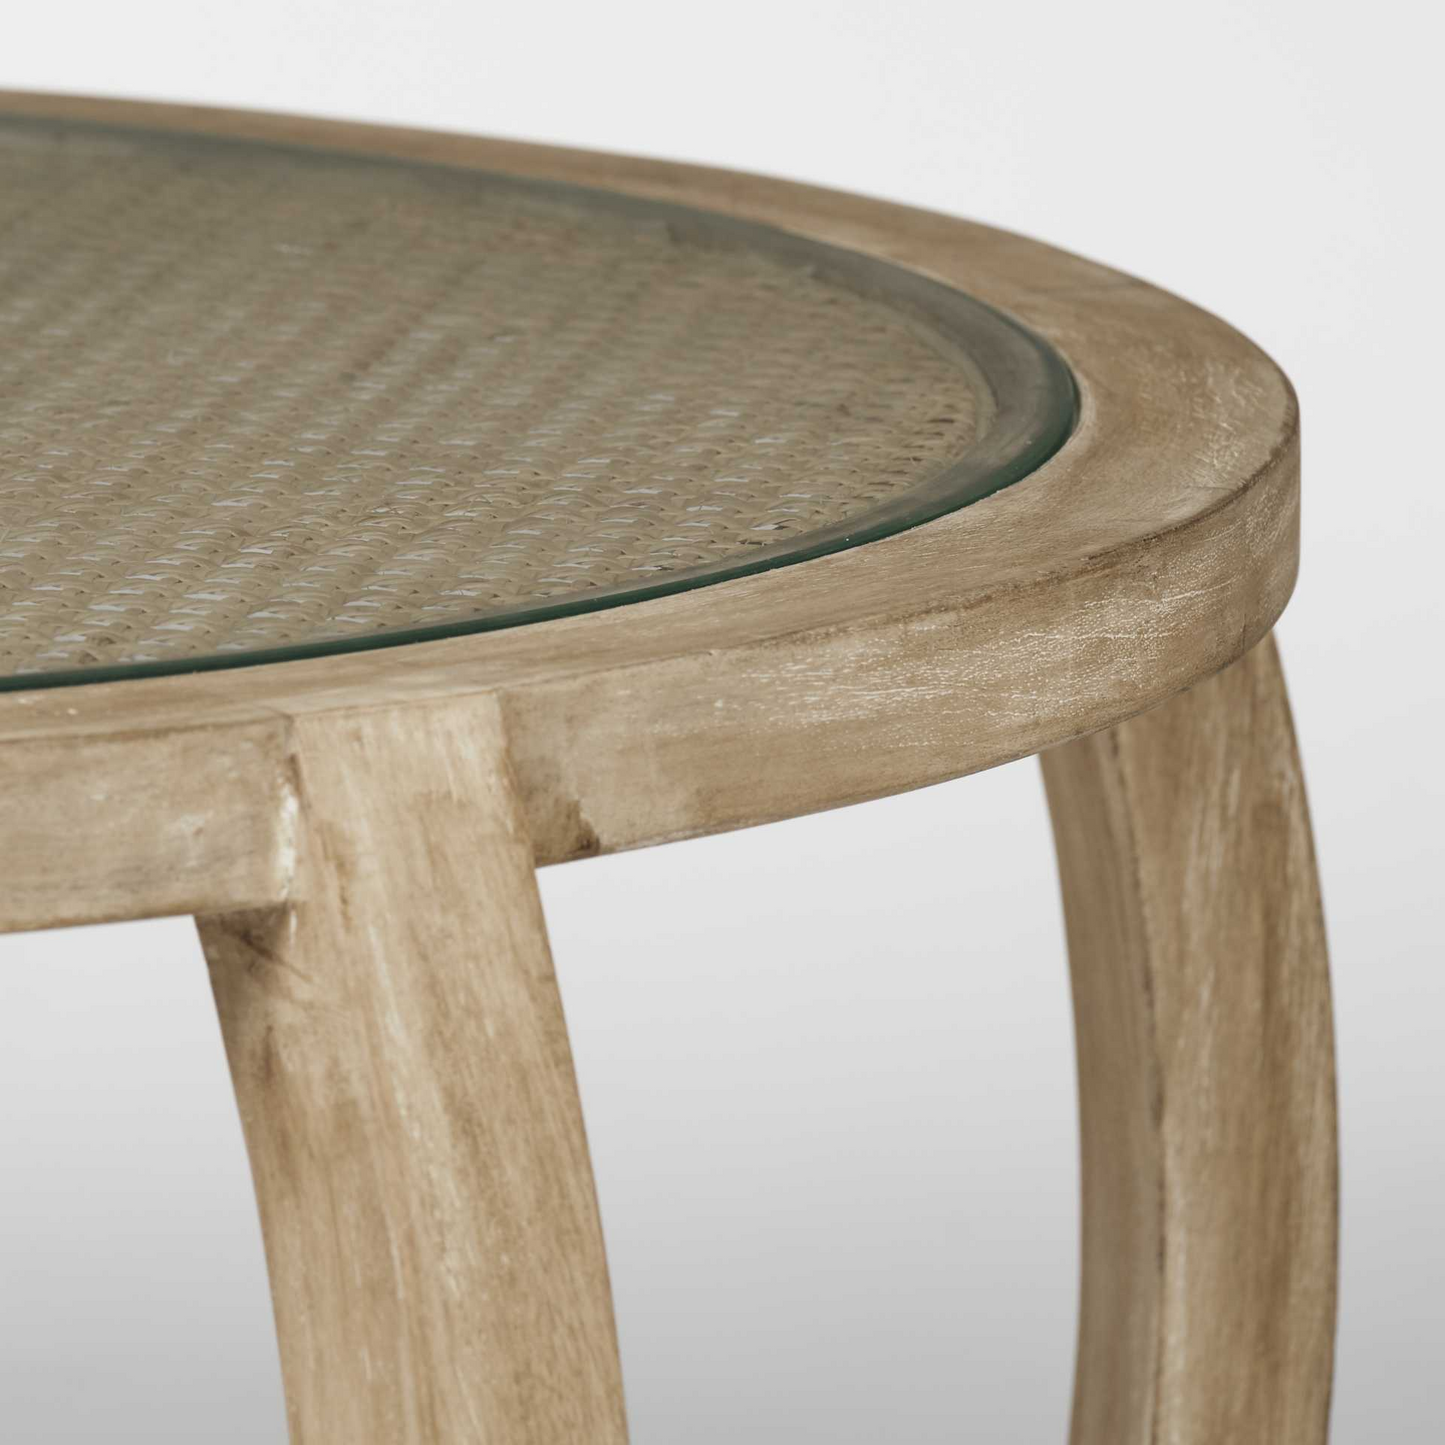 "S2 41.5"" Round Woven Cane Glass Top And Solid Wood Coffee Tables"